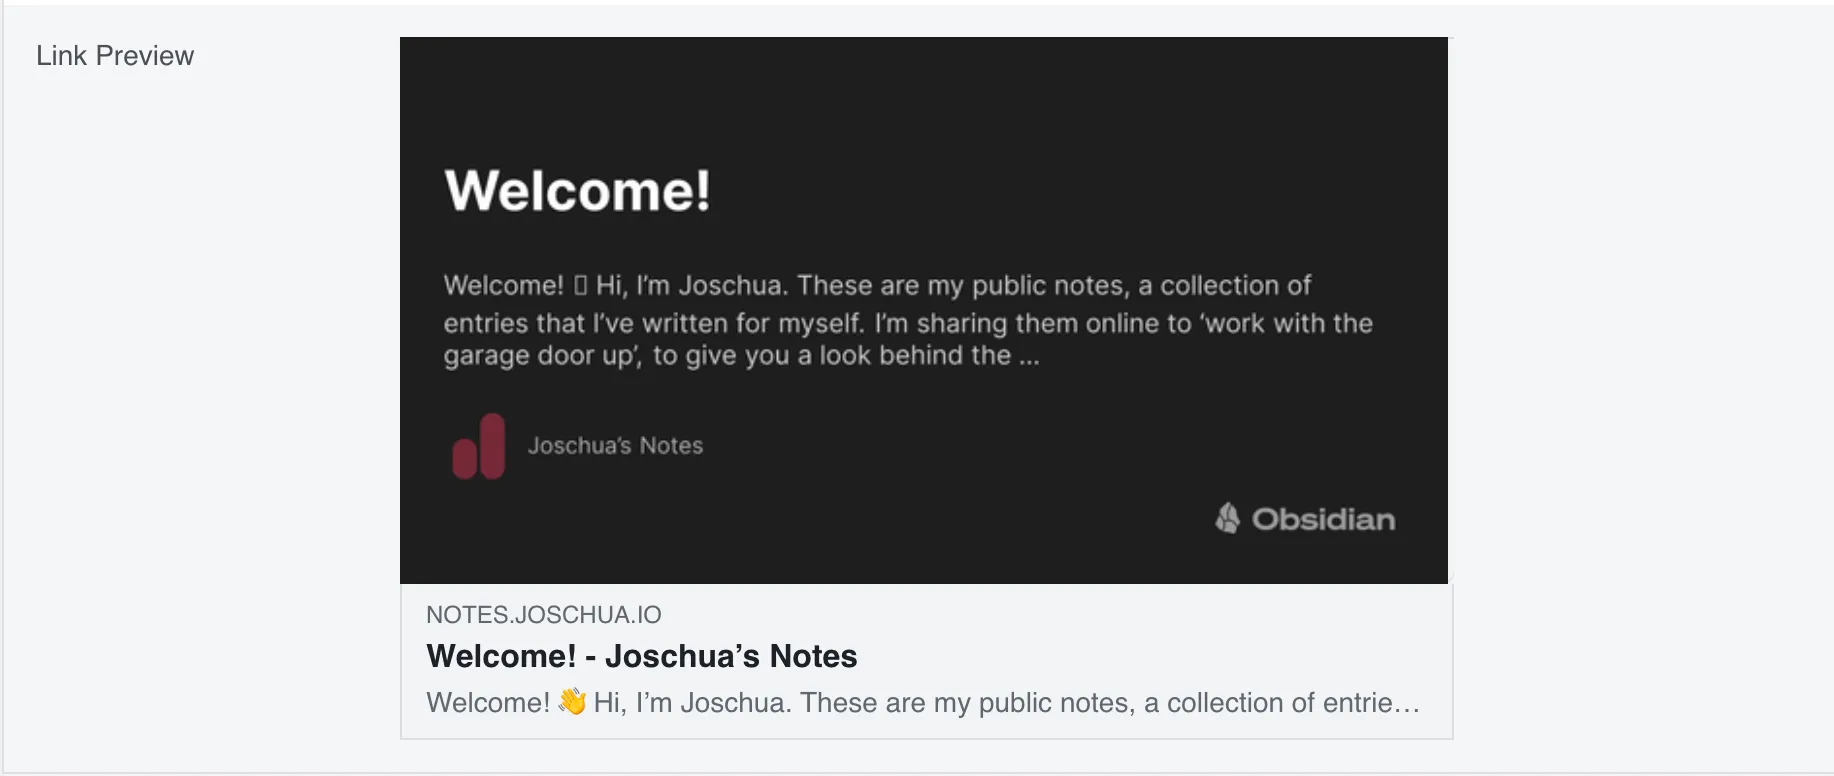 Link preview image that shows Welcome as the title of the note